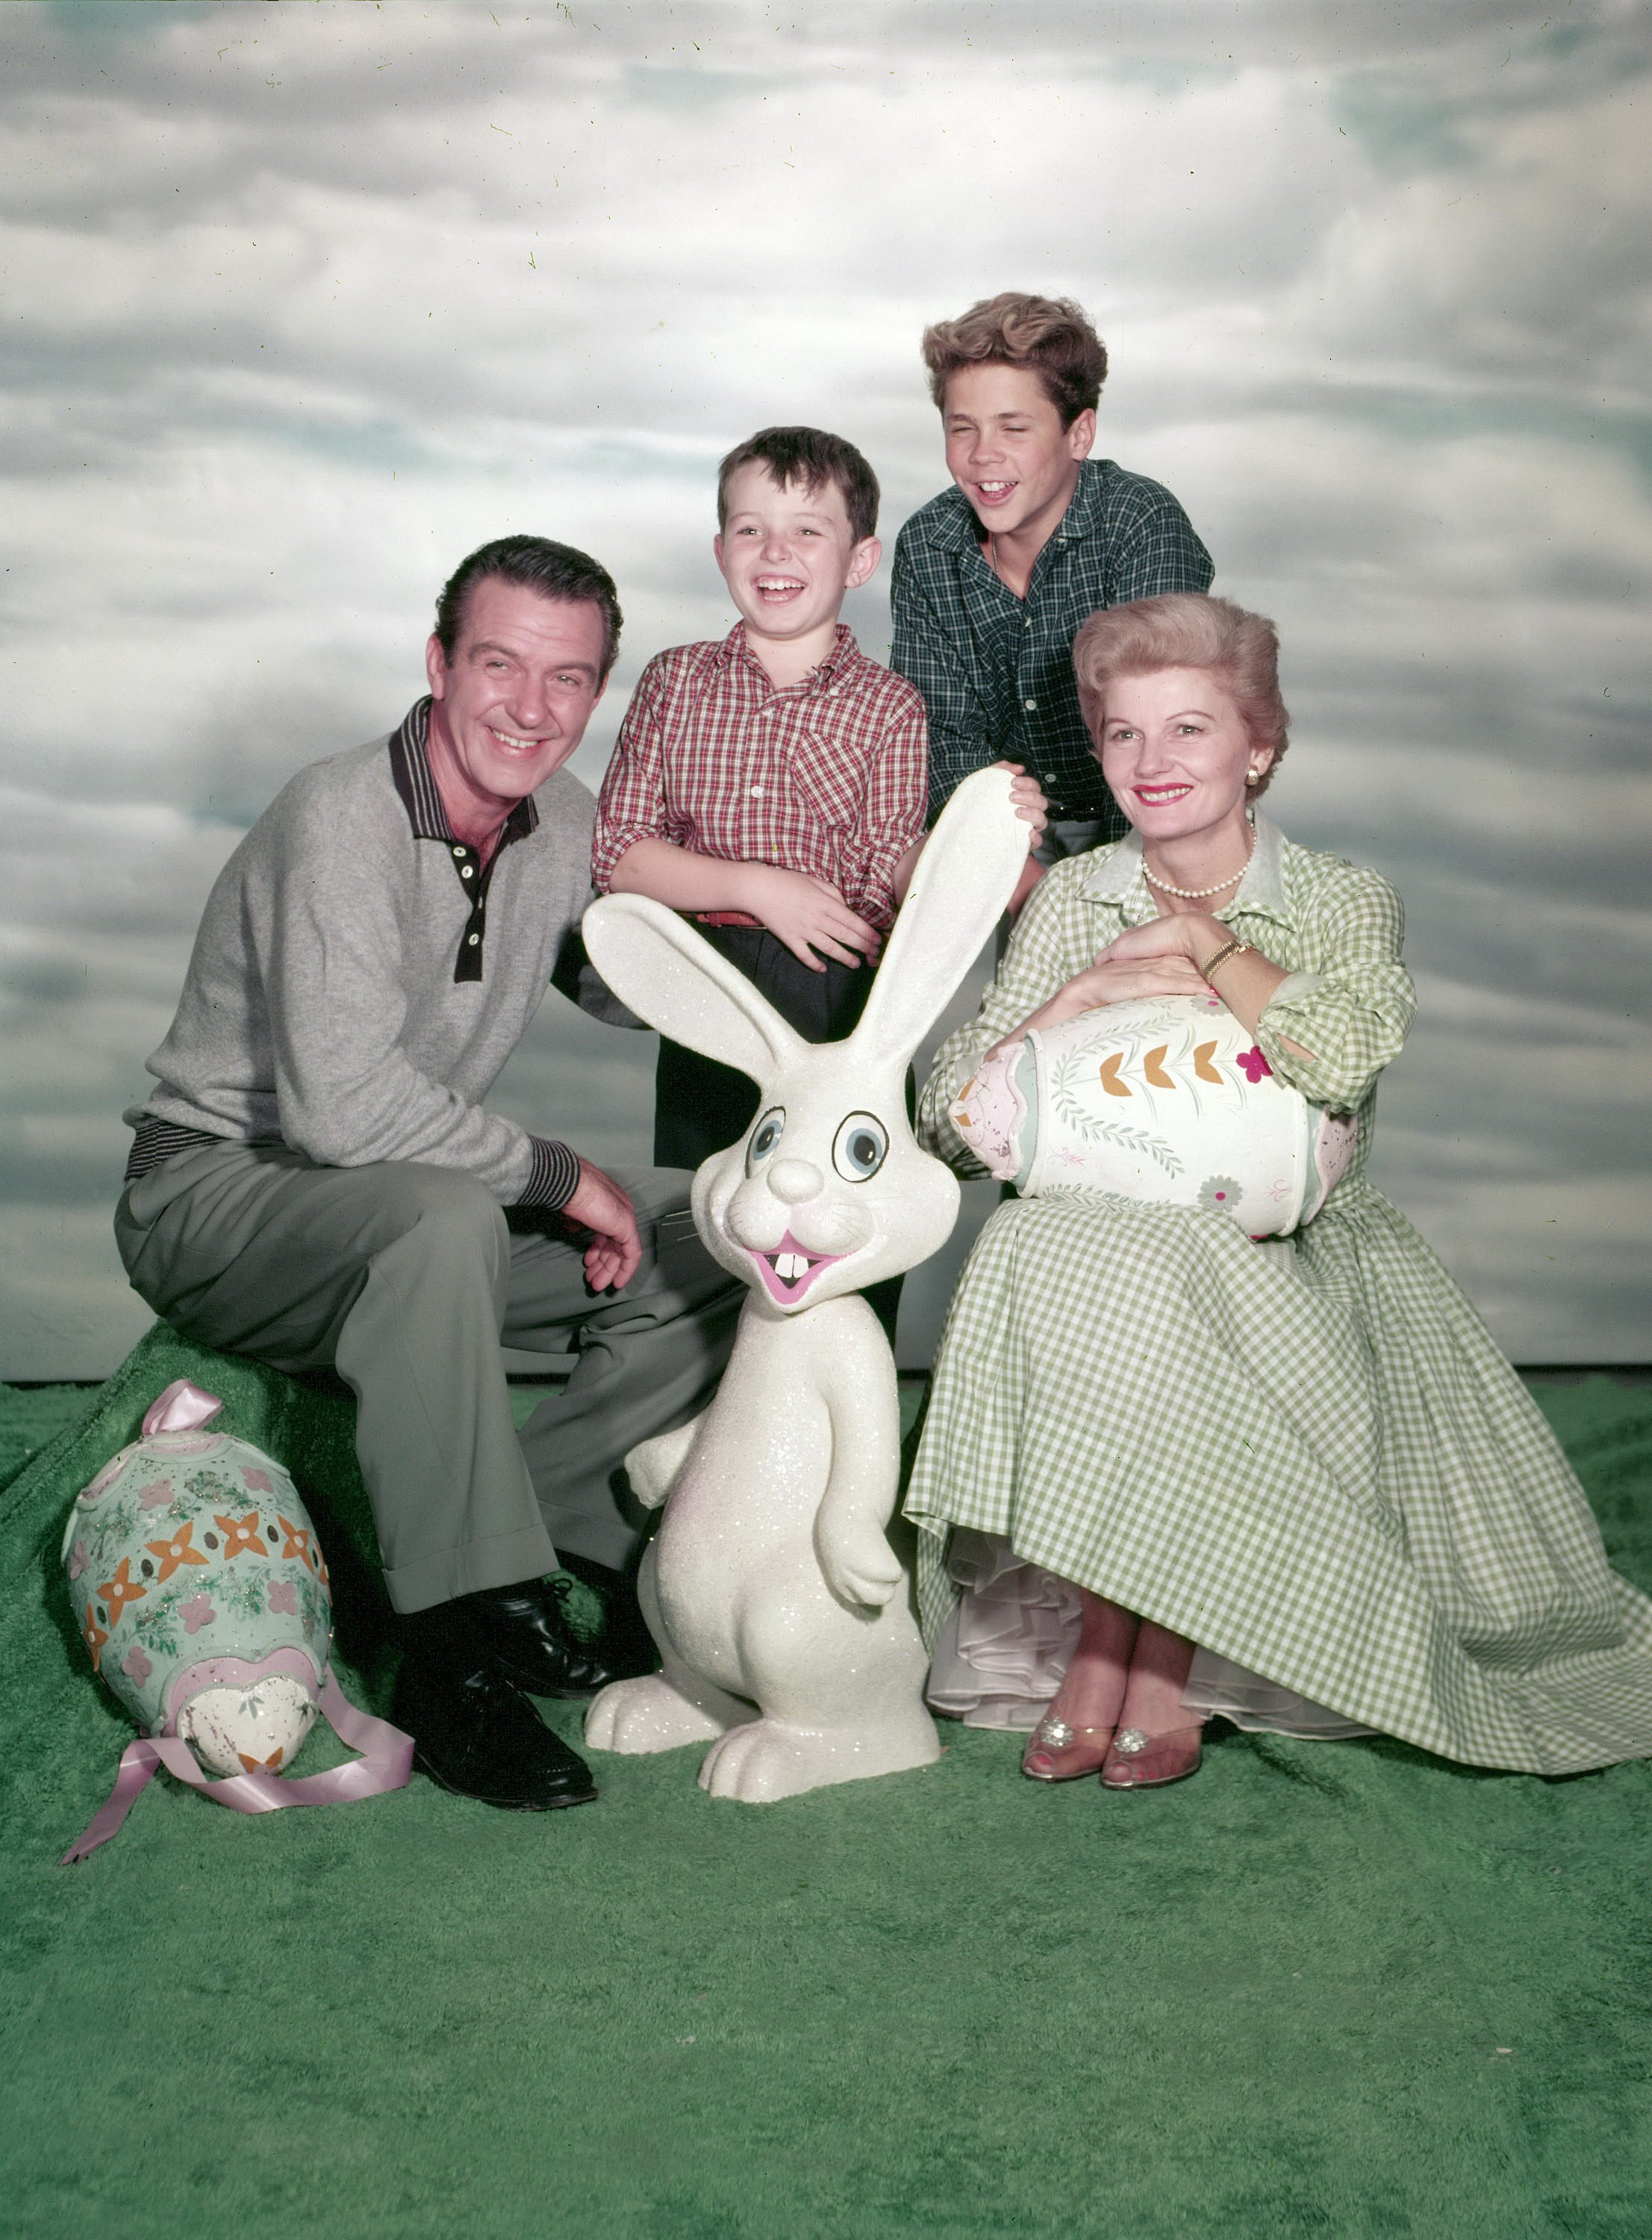 Hugh Beaumont, Jerry Mathers, Tony Dow, and Barbara Billingsley from 'Leave It to Beaver'